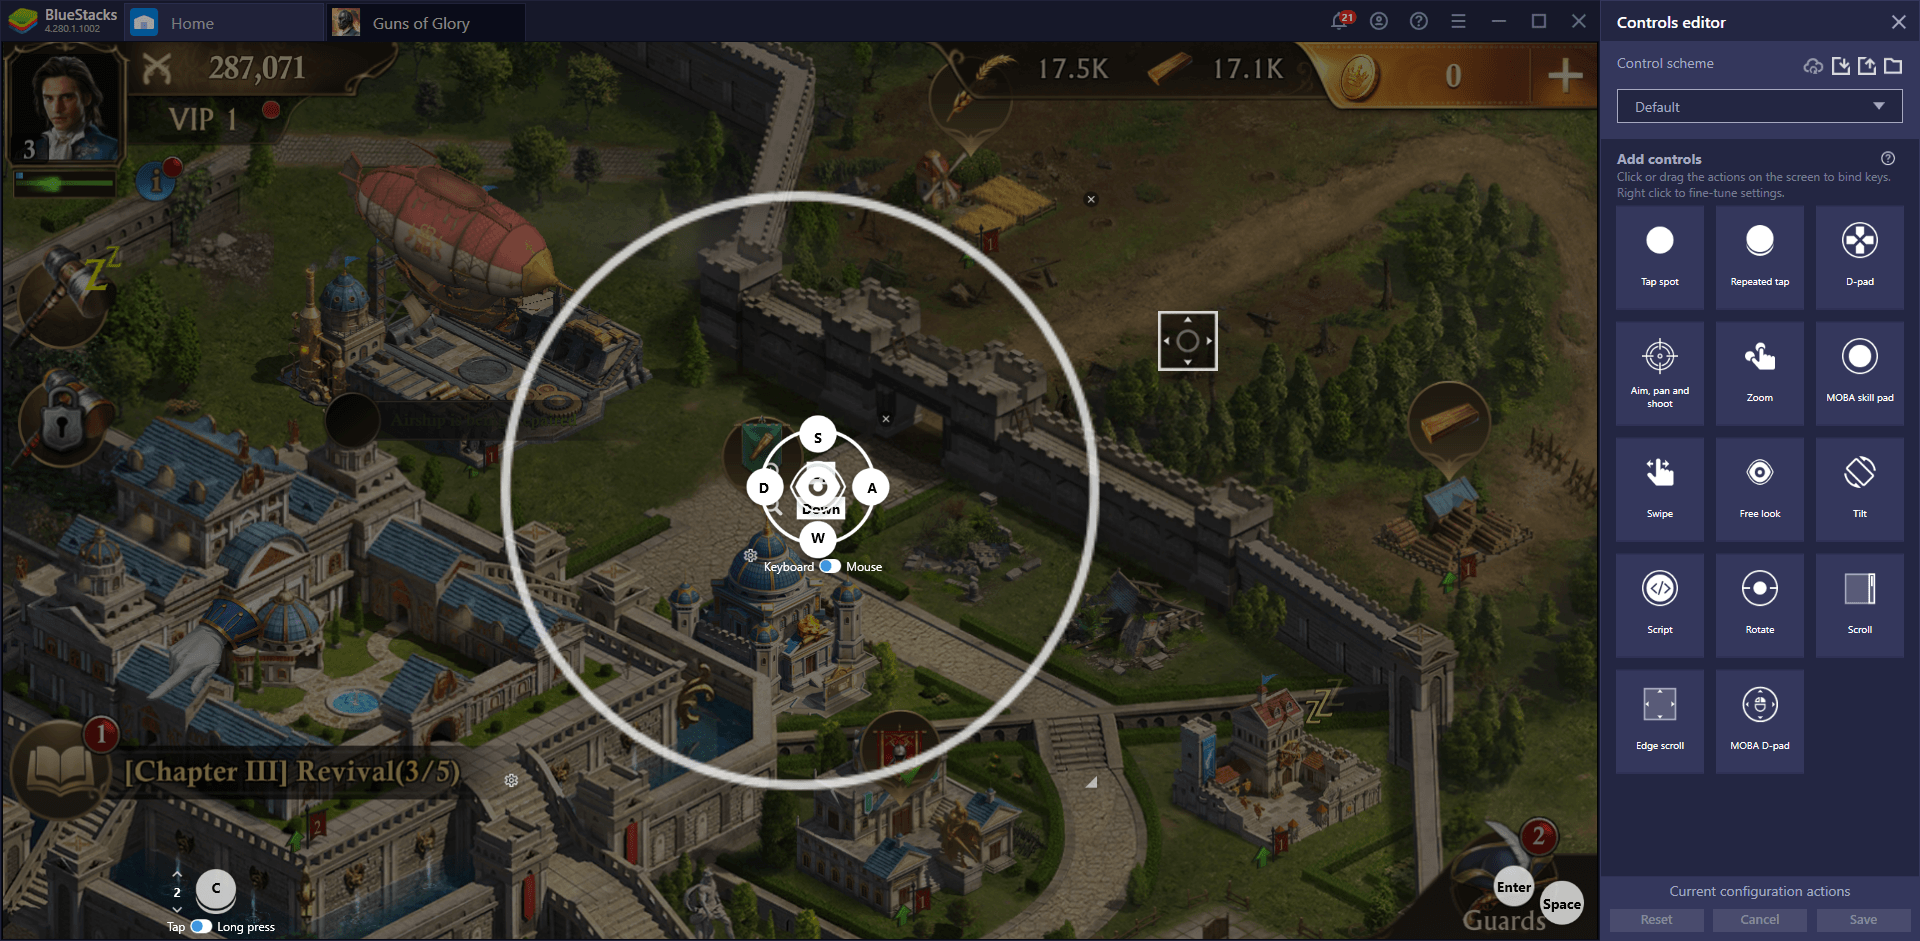 Guns of Glory on PC - How to Use BlueStacks’ Tools to Dominate Your Enemies